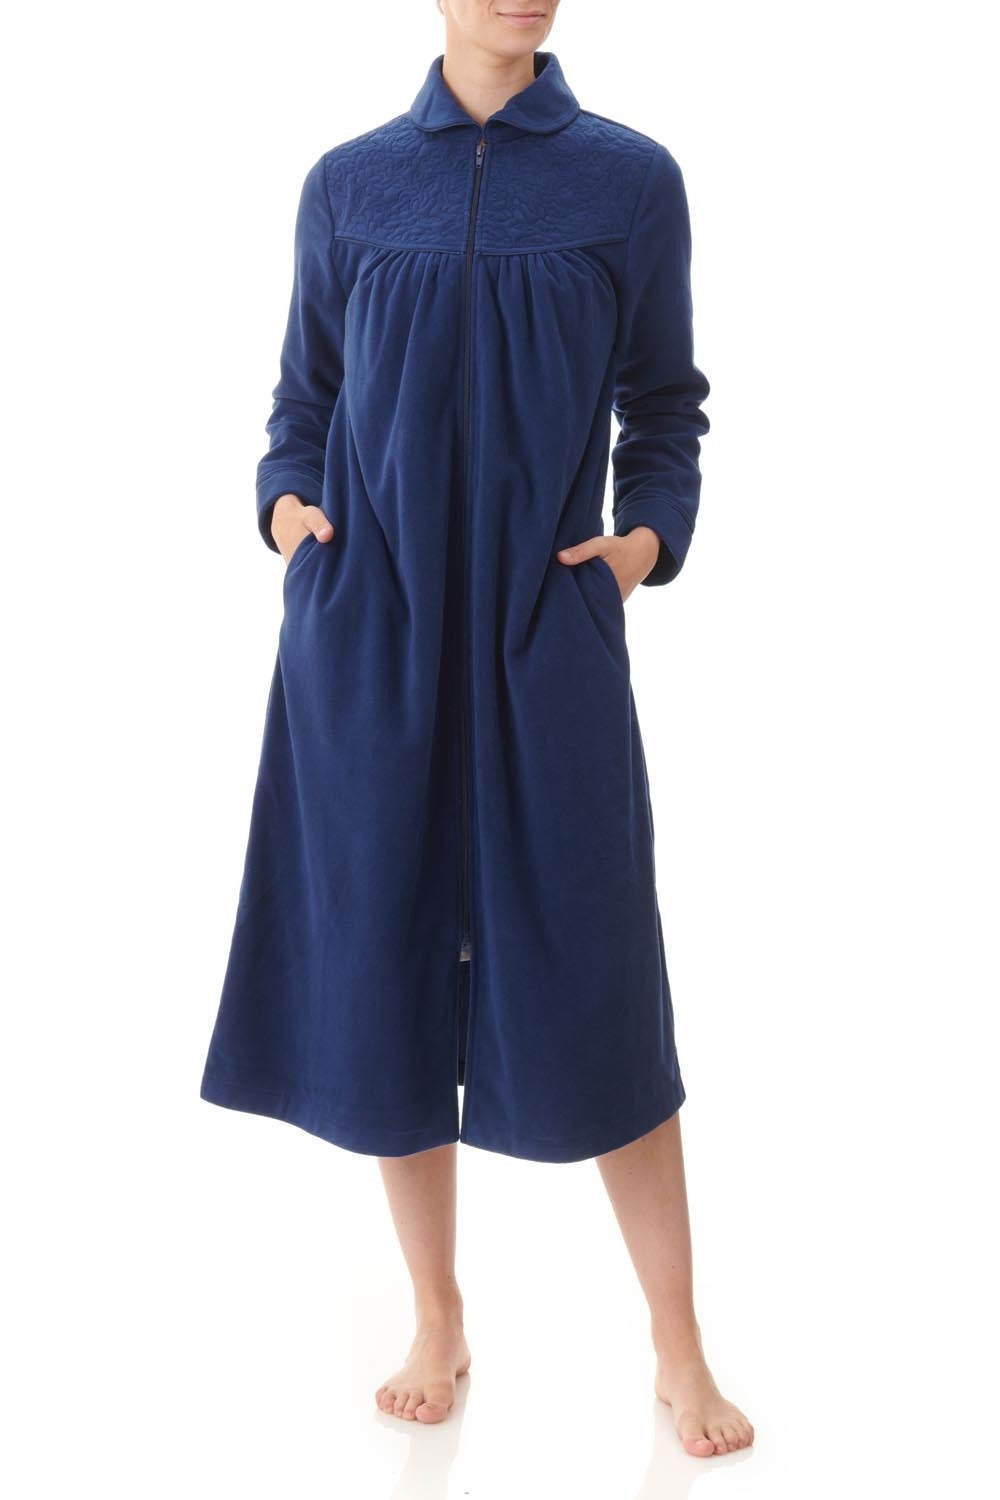 Fluffy Dressing Gown for Women,Ladies Teddy Fleece Nightgowns Full Length  Zip Up Robes Loose Fit Bathrobes with Pockets Supersoft Plush Velvet Pyjamas  Winter Pajamas Long Loungewear UK - Walmart.com